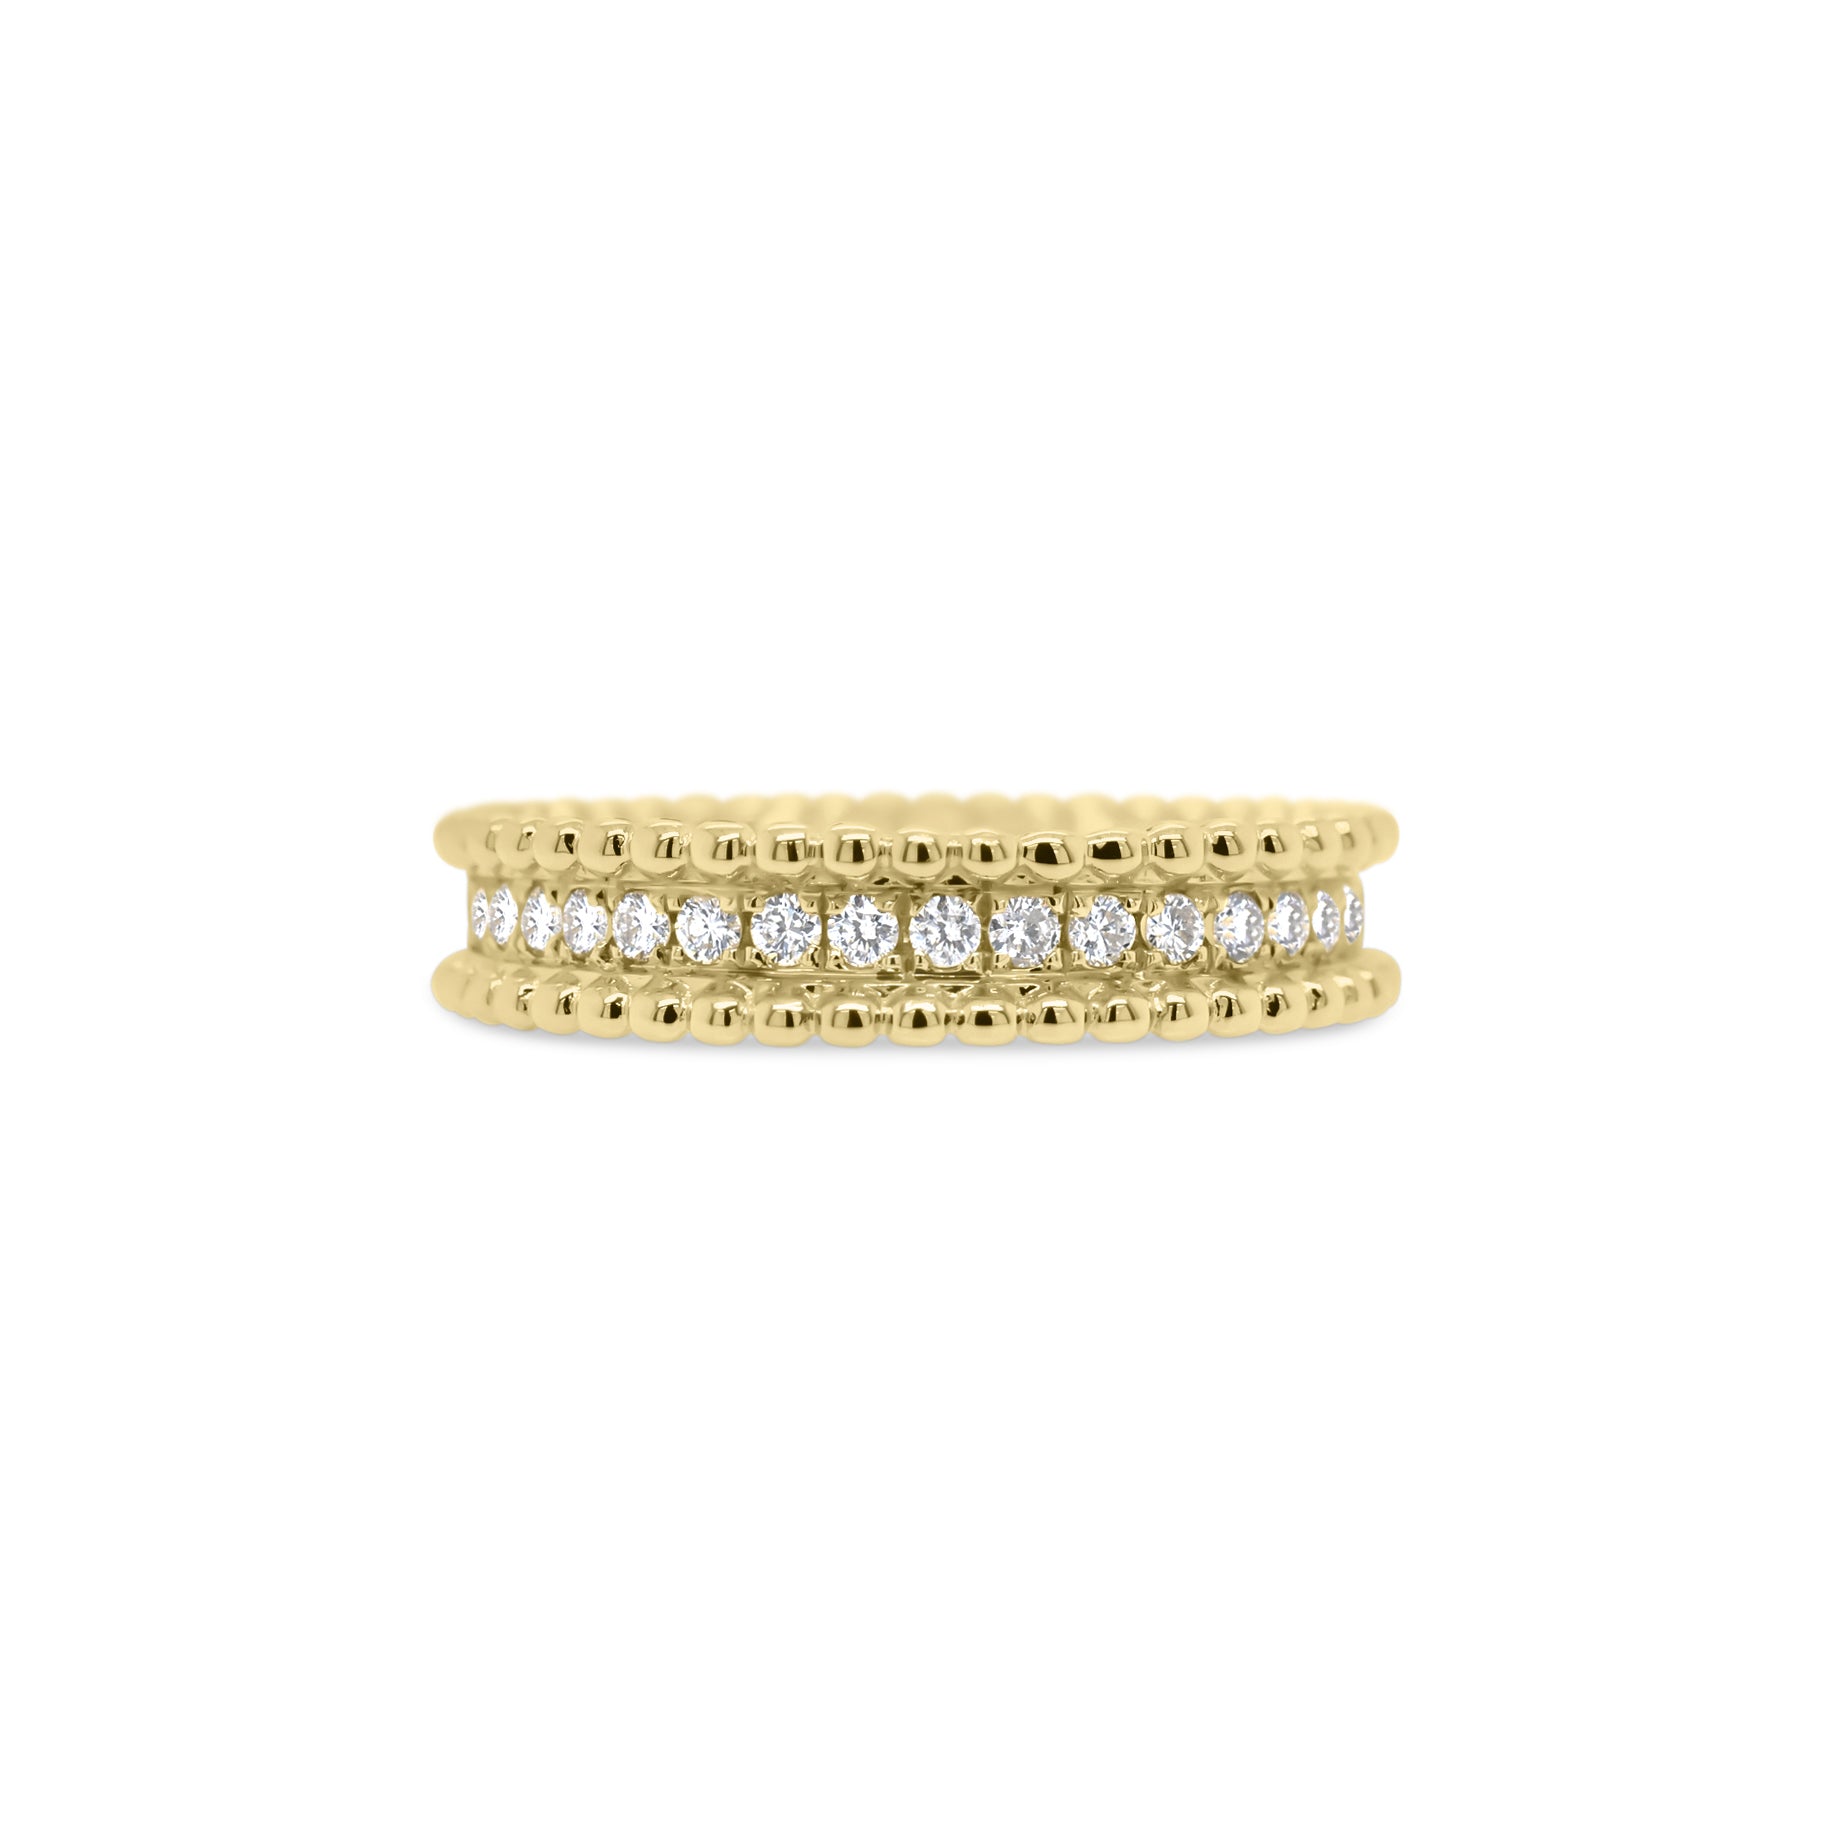 Diamond & Beaded Gold Stackable Ring  - 18K gold weighing 4.02 grams  - 18 round diamonds totaling 0.23 carats